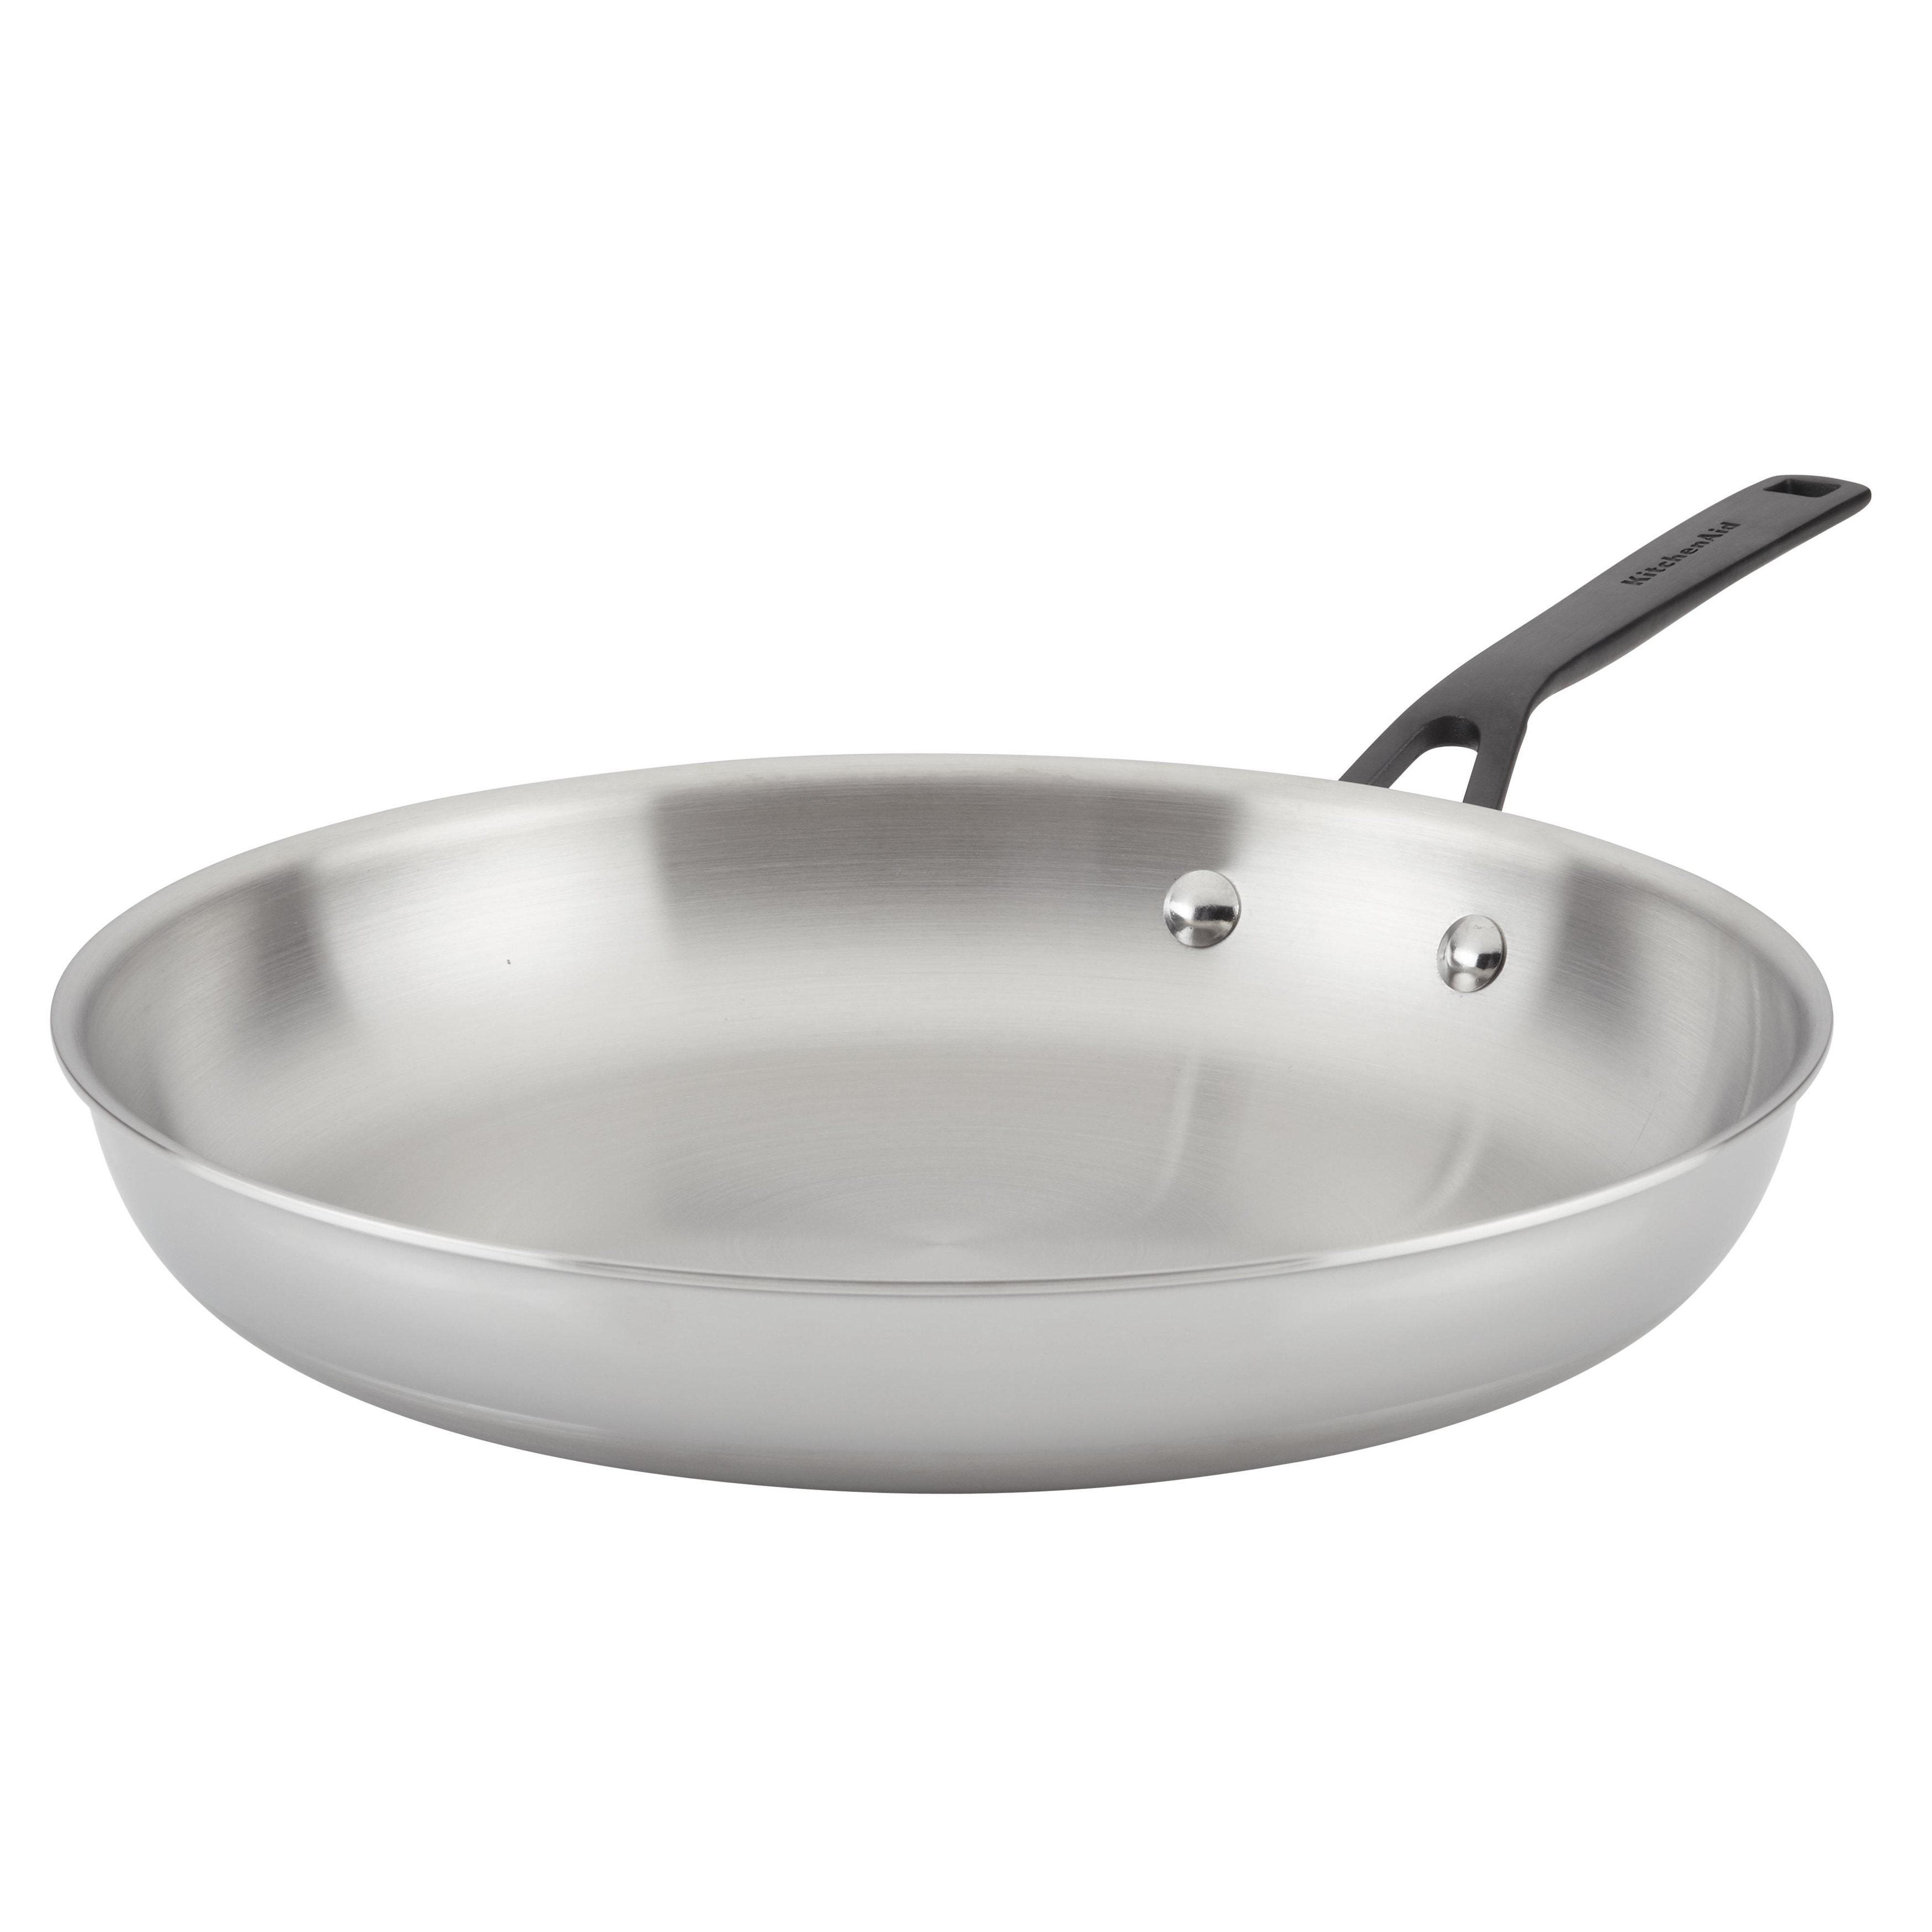 https://ak1.ostkcdn.com/images/products/is/images/direct/149309bac3d7f189640e4888232991b3278e3745/KitchenAid-5-Ply-Clad-Stainless-Steel-Frying-Pan%2C-12.25-Inch.jpg